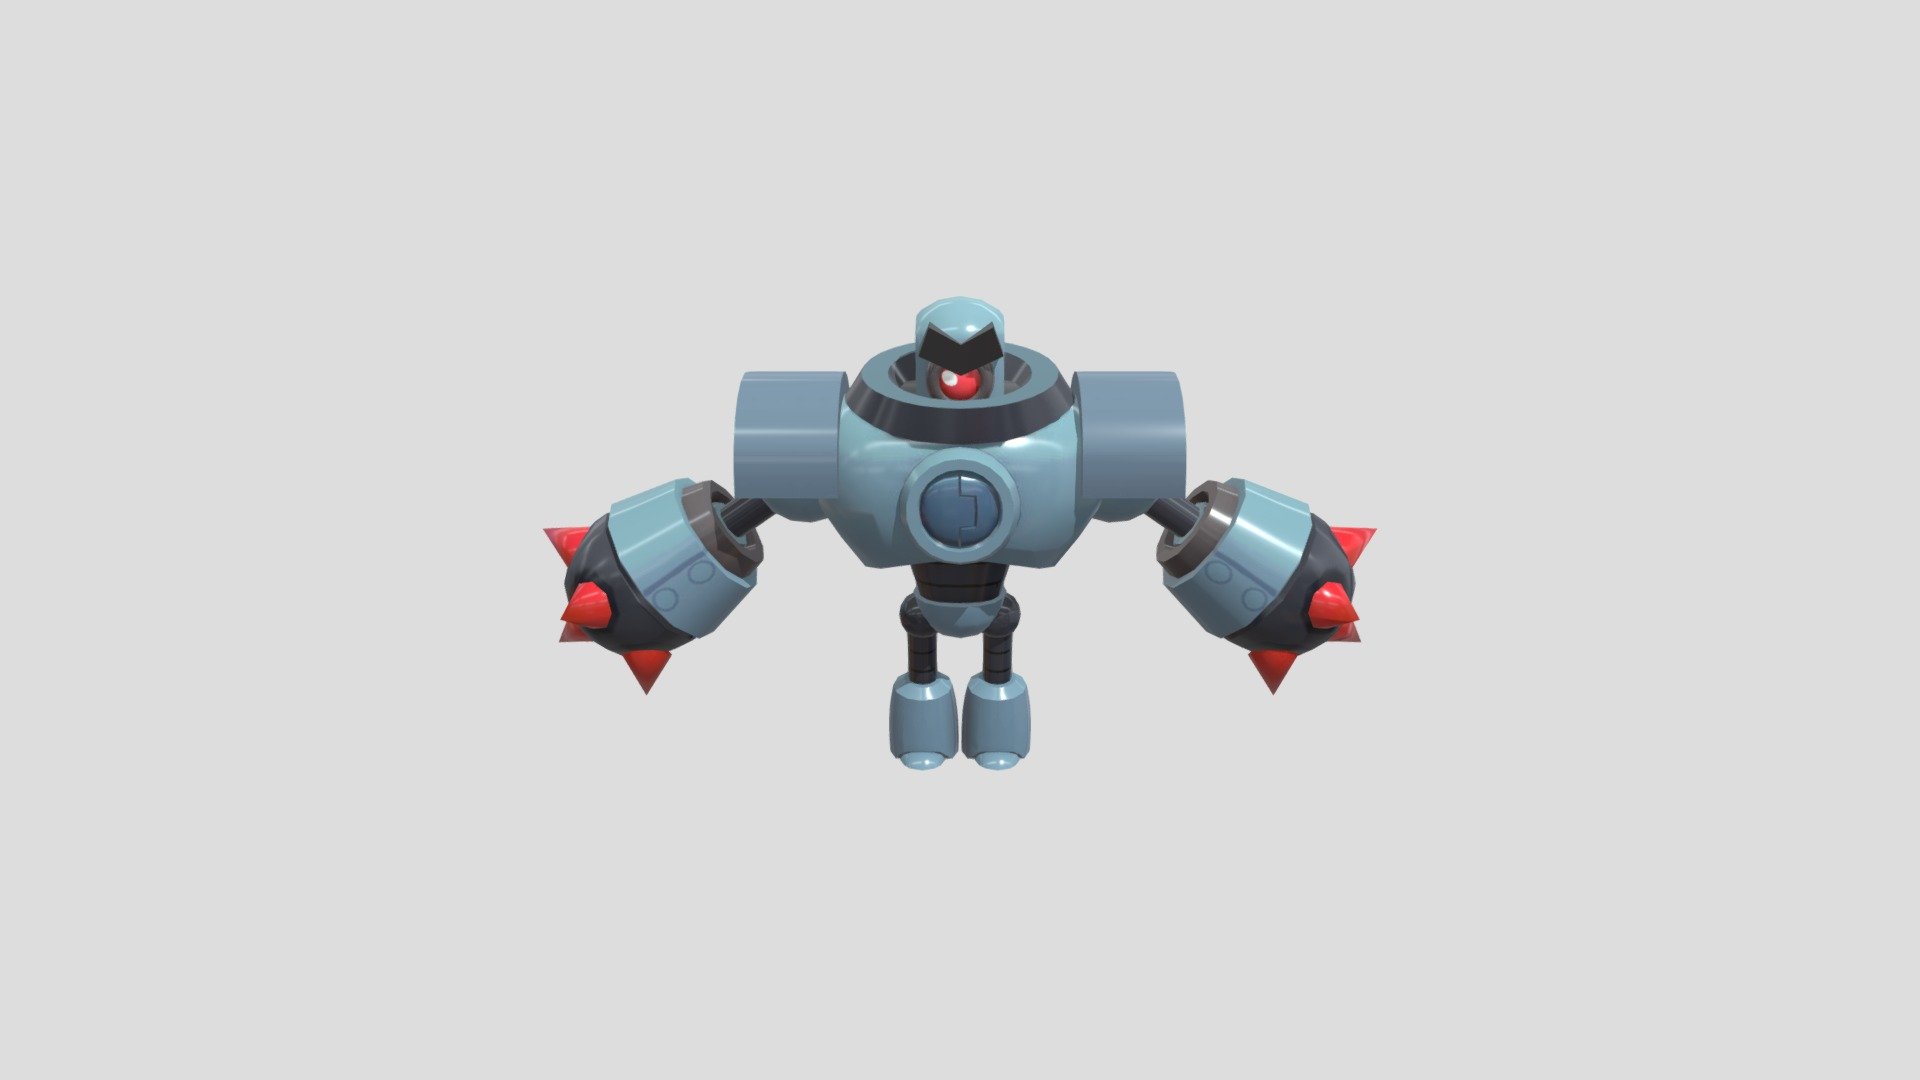 Can you beat the formidable Boss Robot? Join forces with two teammates and take down this monster. You can get back in the fight as long as at least one of your teammates is standing. If everyone falls, it's game over! Boss Fights increase in Challenge, from normal all the way to Insane, every time you manage to beat the Boss 3d model